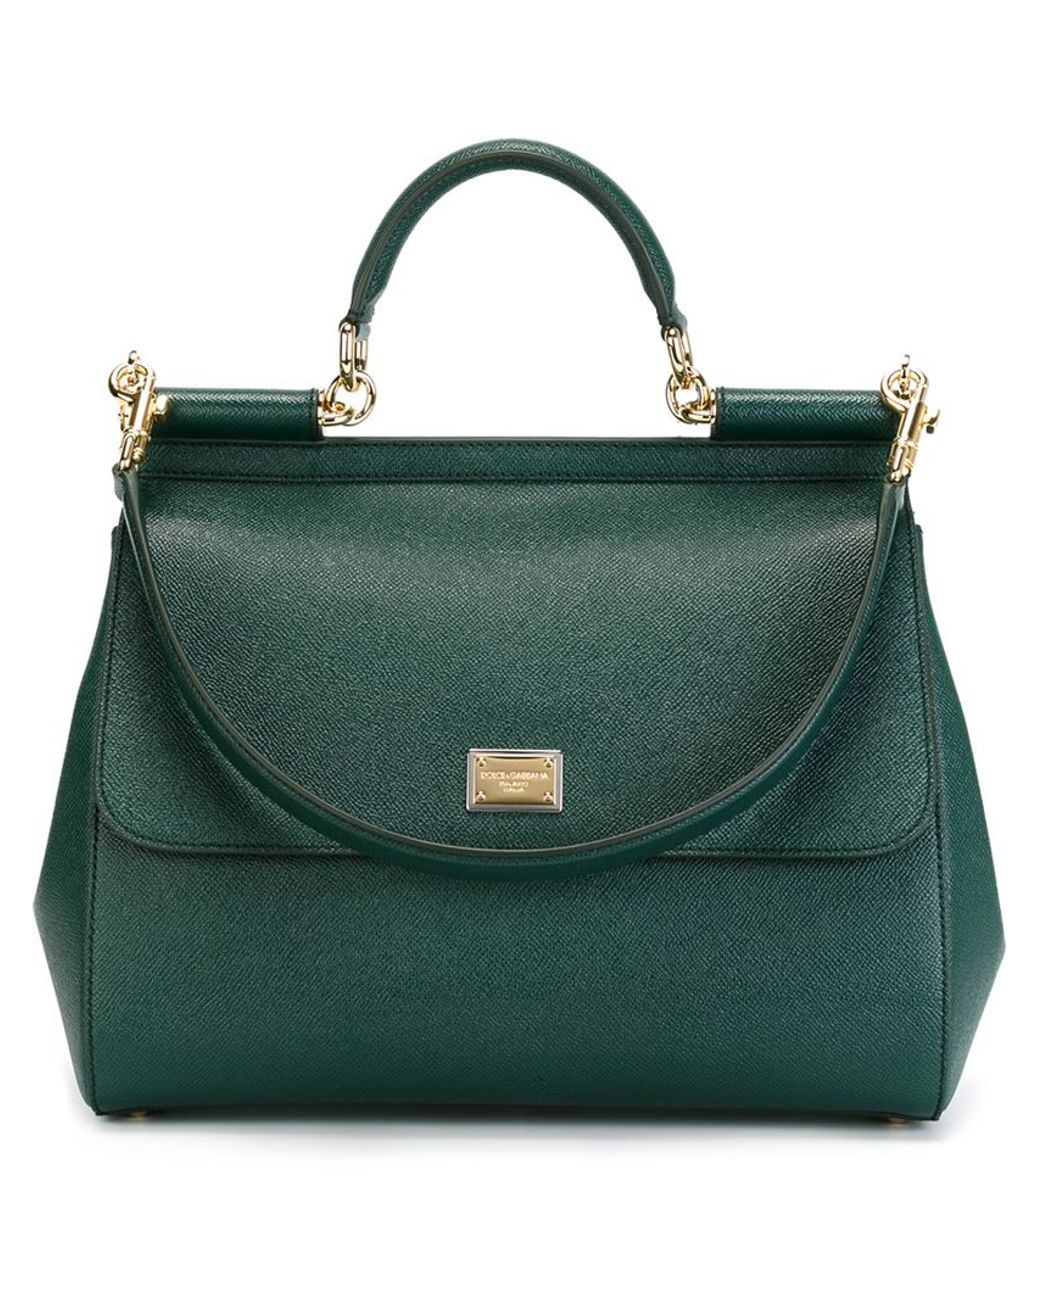 Totes bags Dolce & Gabbana - Sicily small bag in emerald green color -  BB6003A100187174